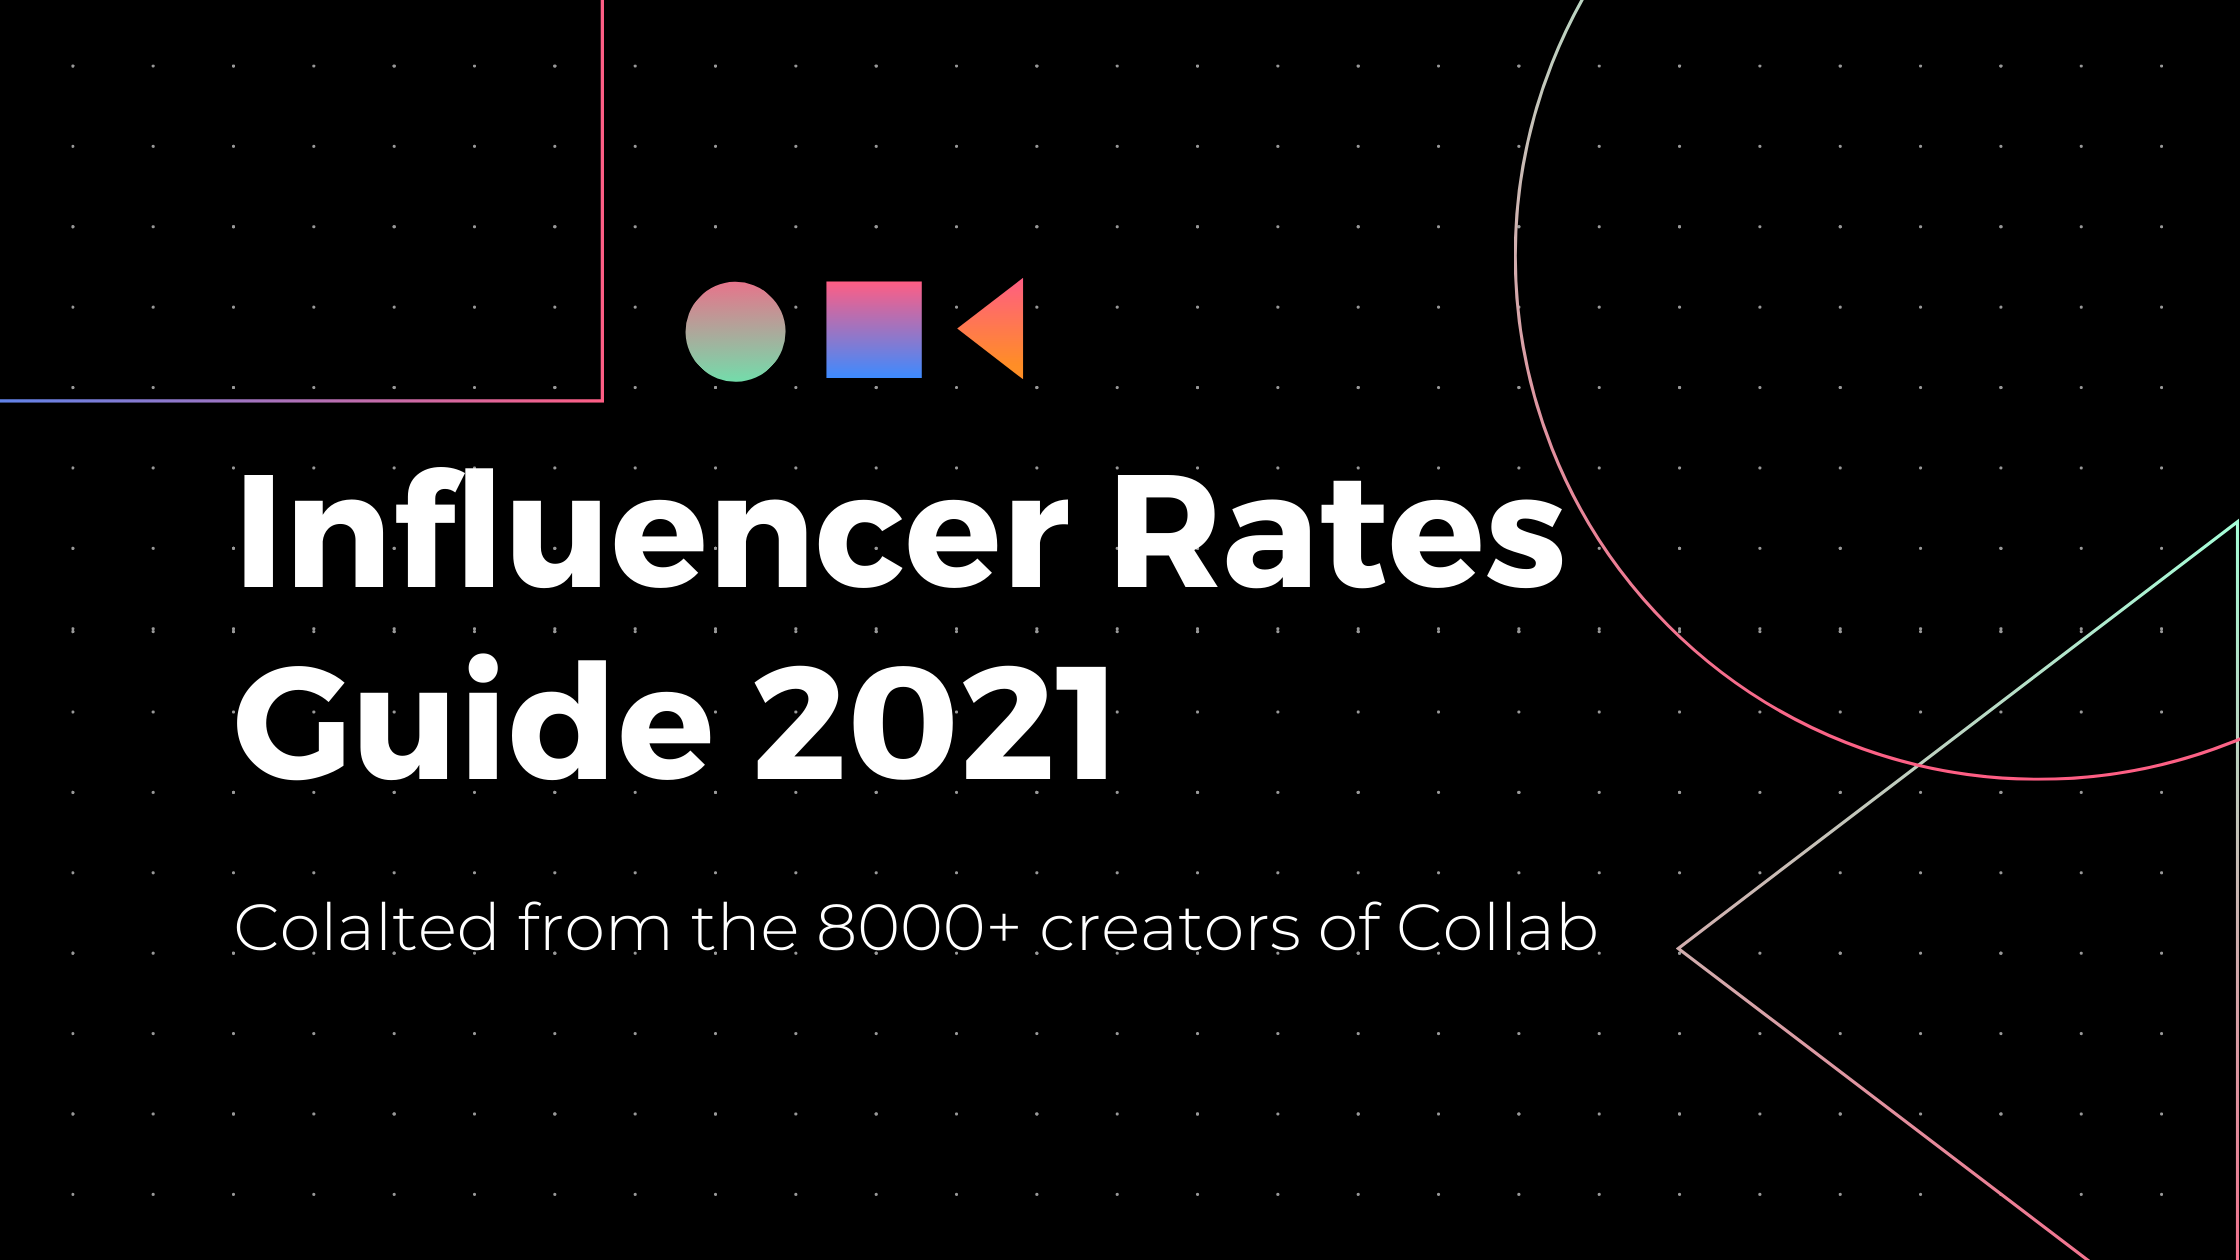 The Complete Guide to Instagram Influencer Rates in 2021